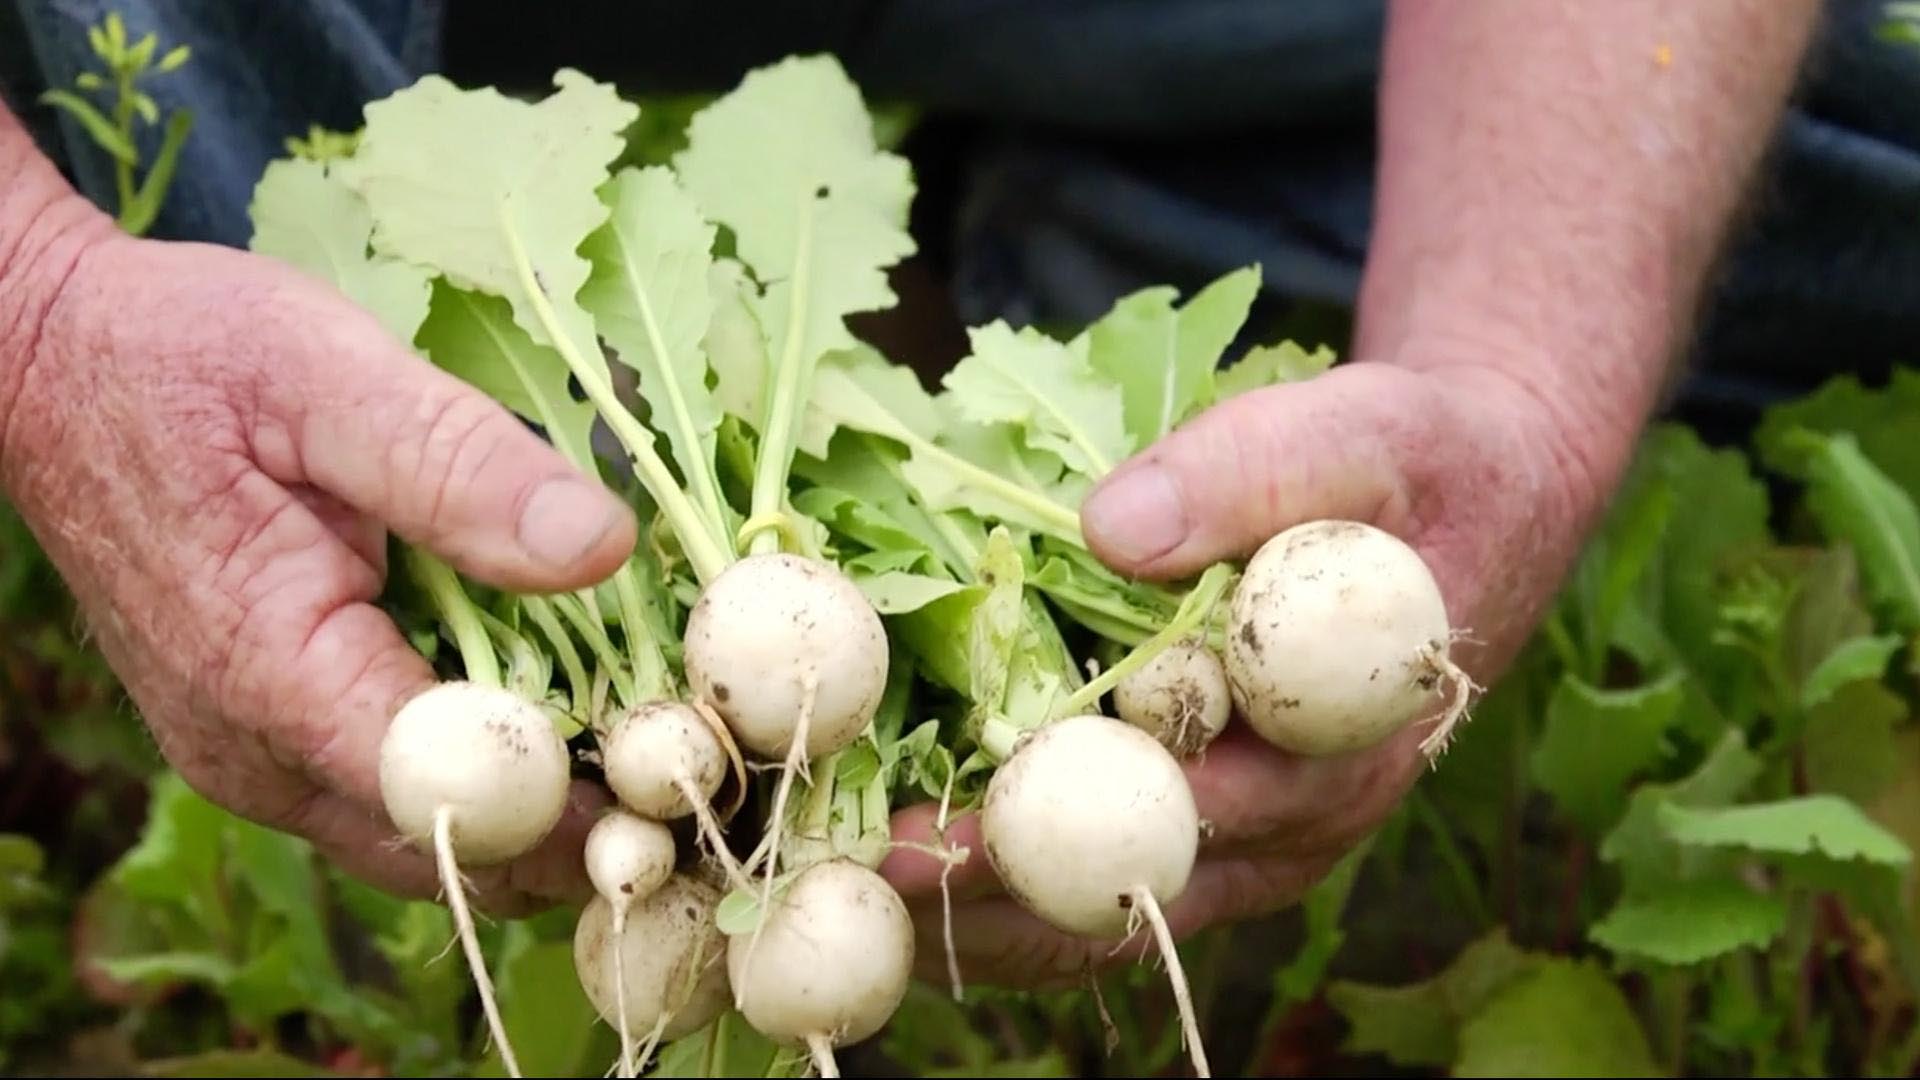 Two hands handle a bunch of turnips.